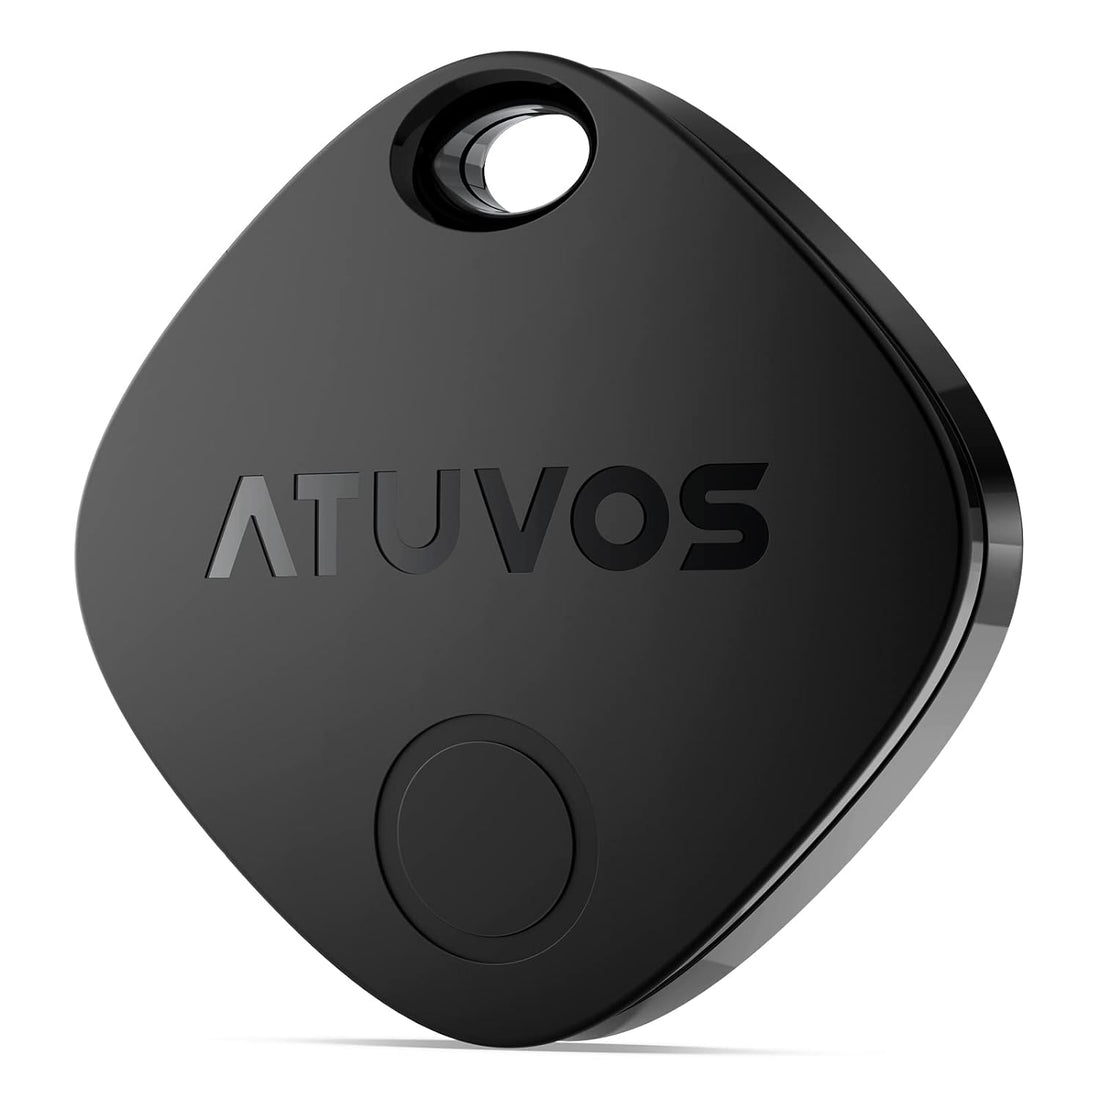 ATUVOS Luggage Trackers for Suitcase, Bluetooth Tracker Works with Apple Find My (iOS only), IP67 Waterproof, Privacy Protection, Lost Mode, Item Locator for, Bags, and More 1 Pack Black